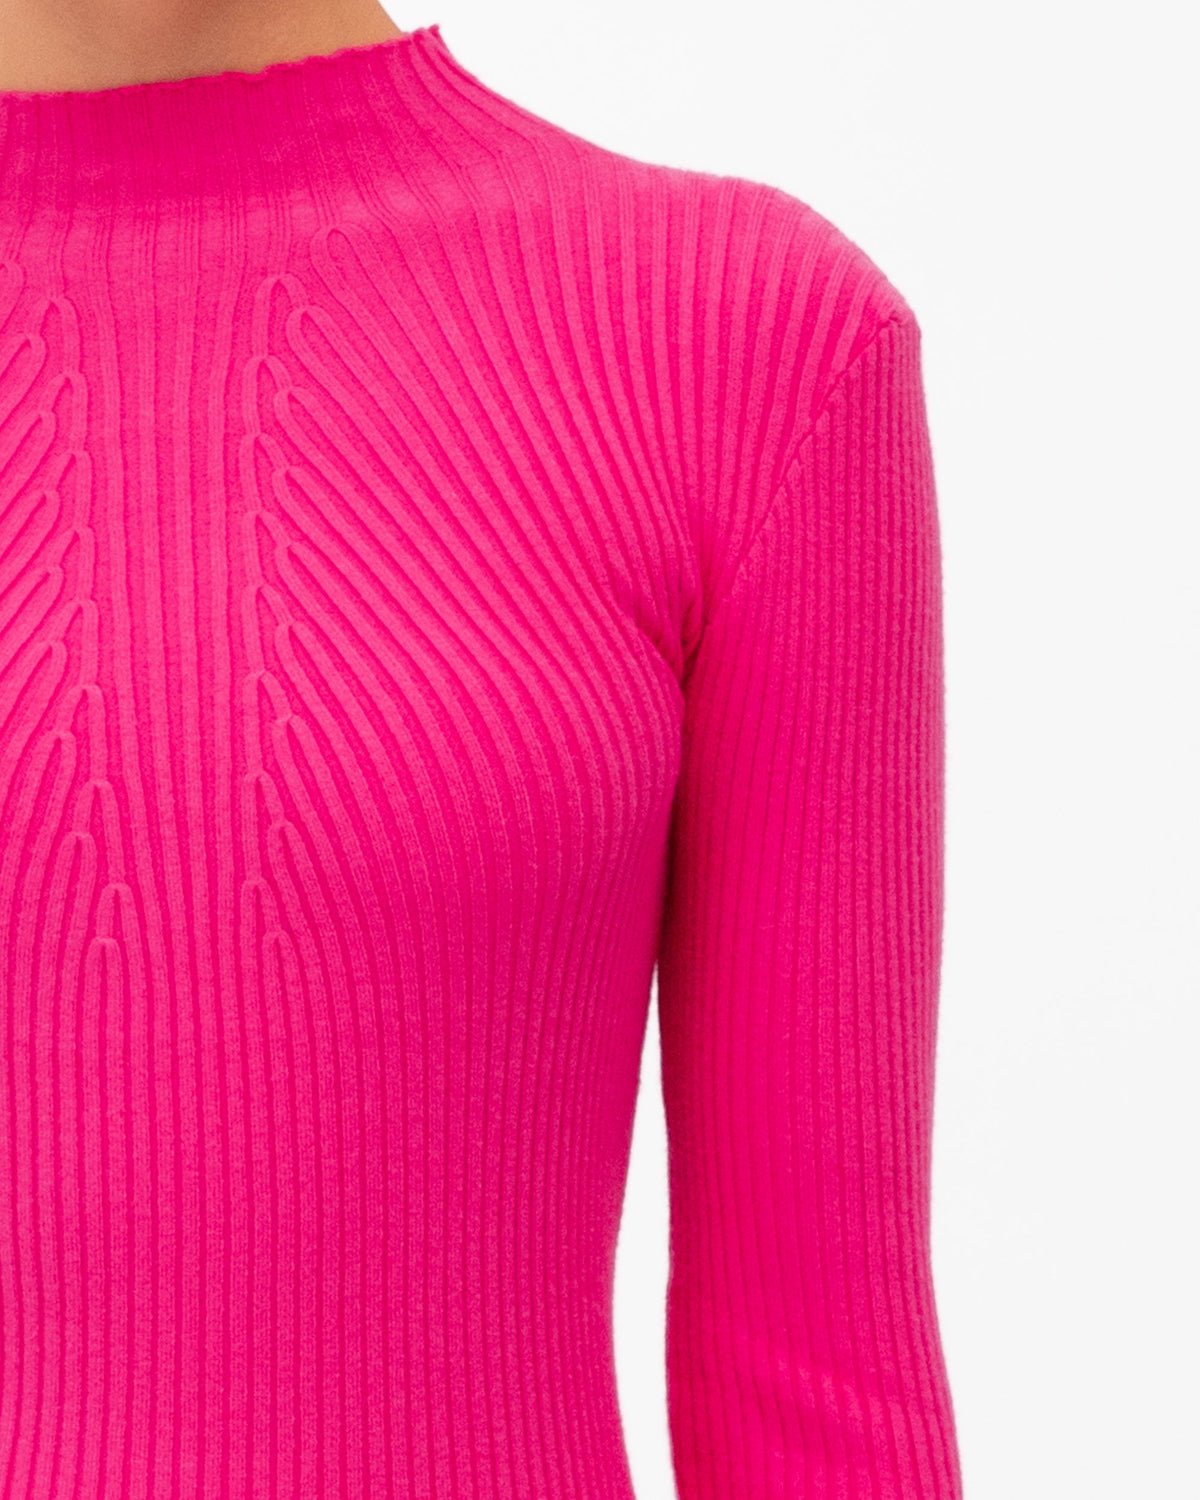 HOT PINK TURTLE NECK RIB KNIT TOP